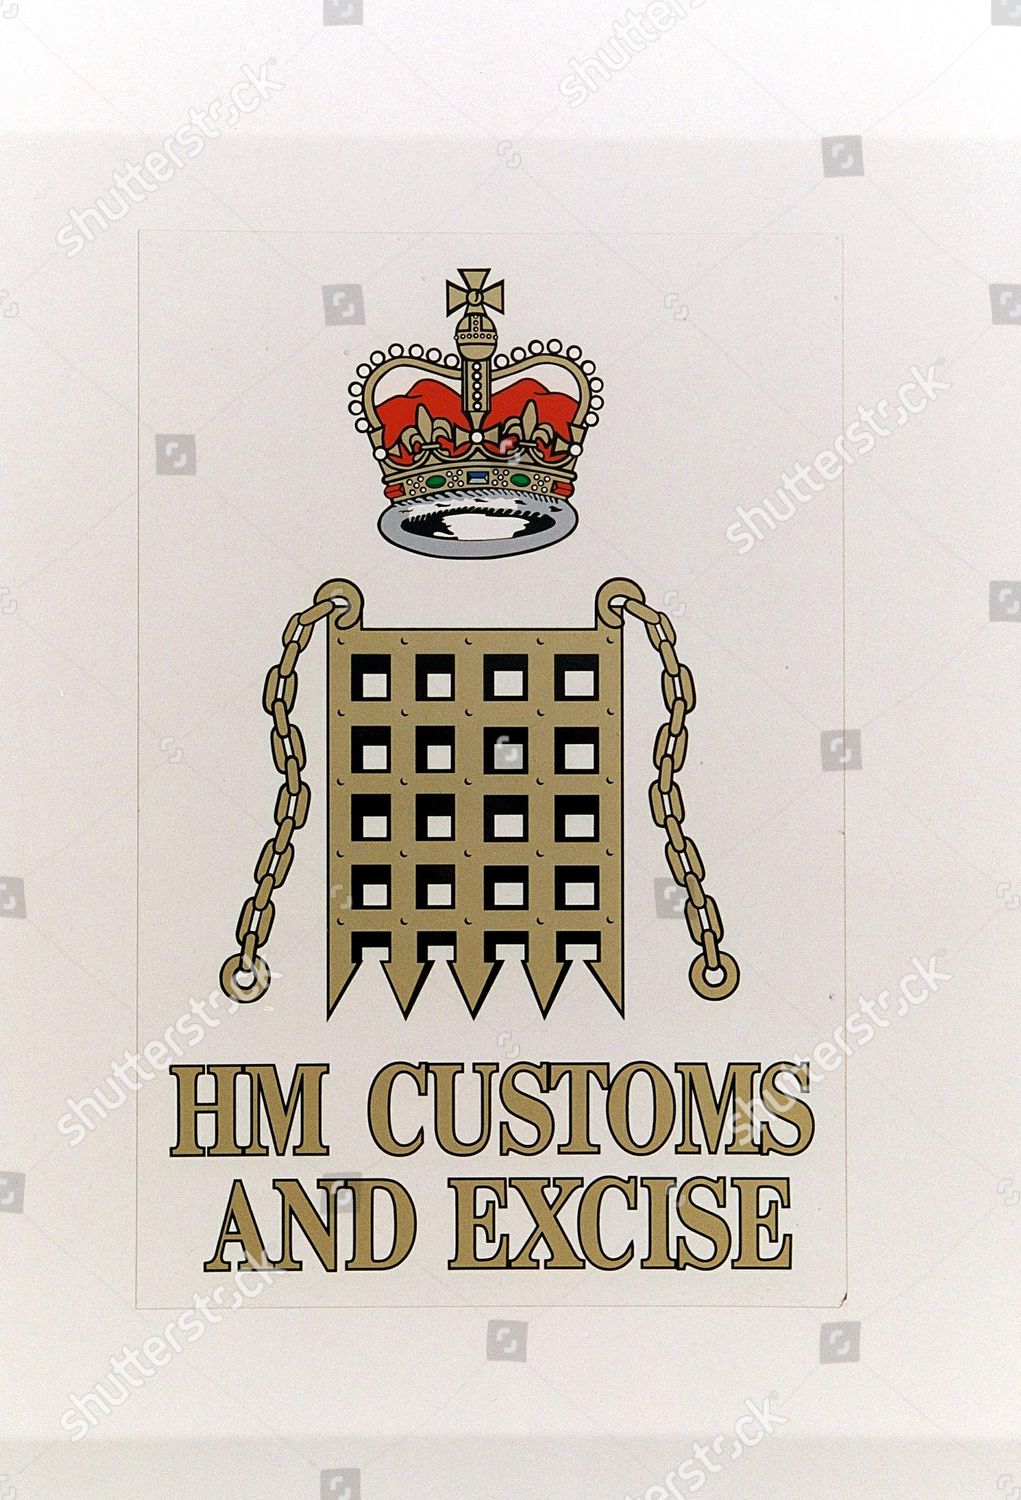 Hm Customs And Excise Tax Return